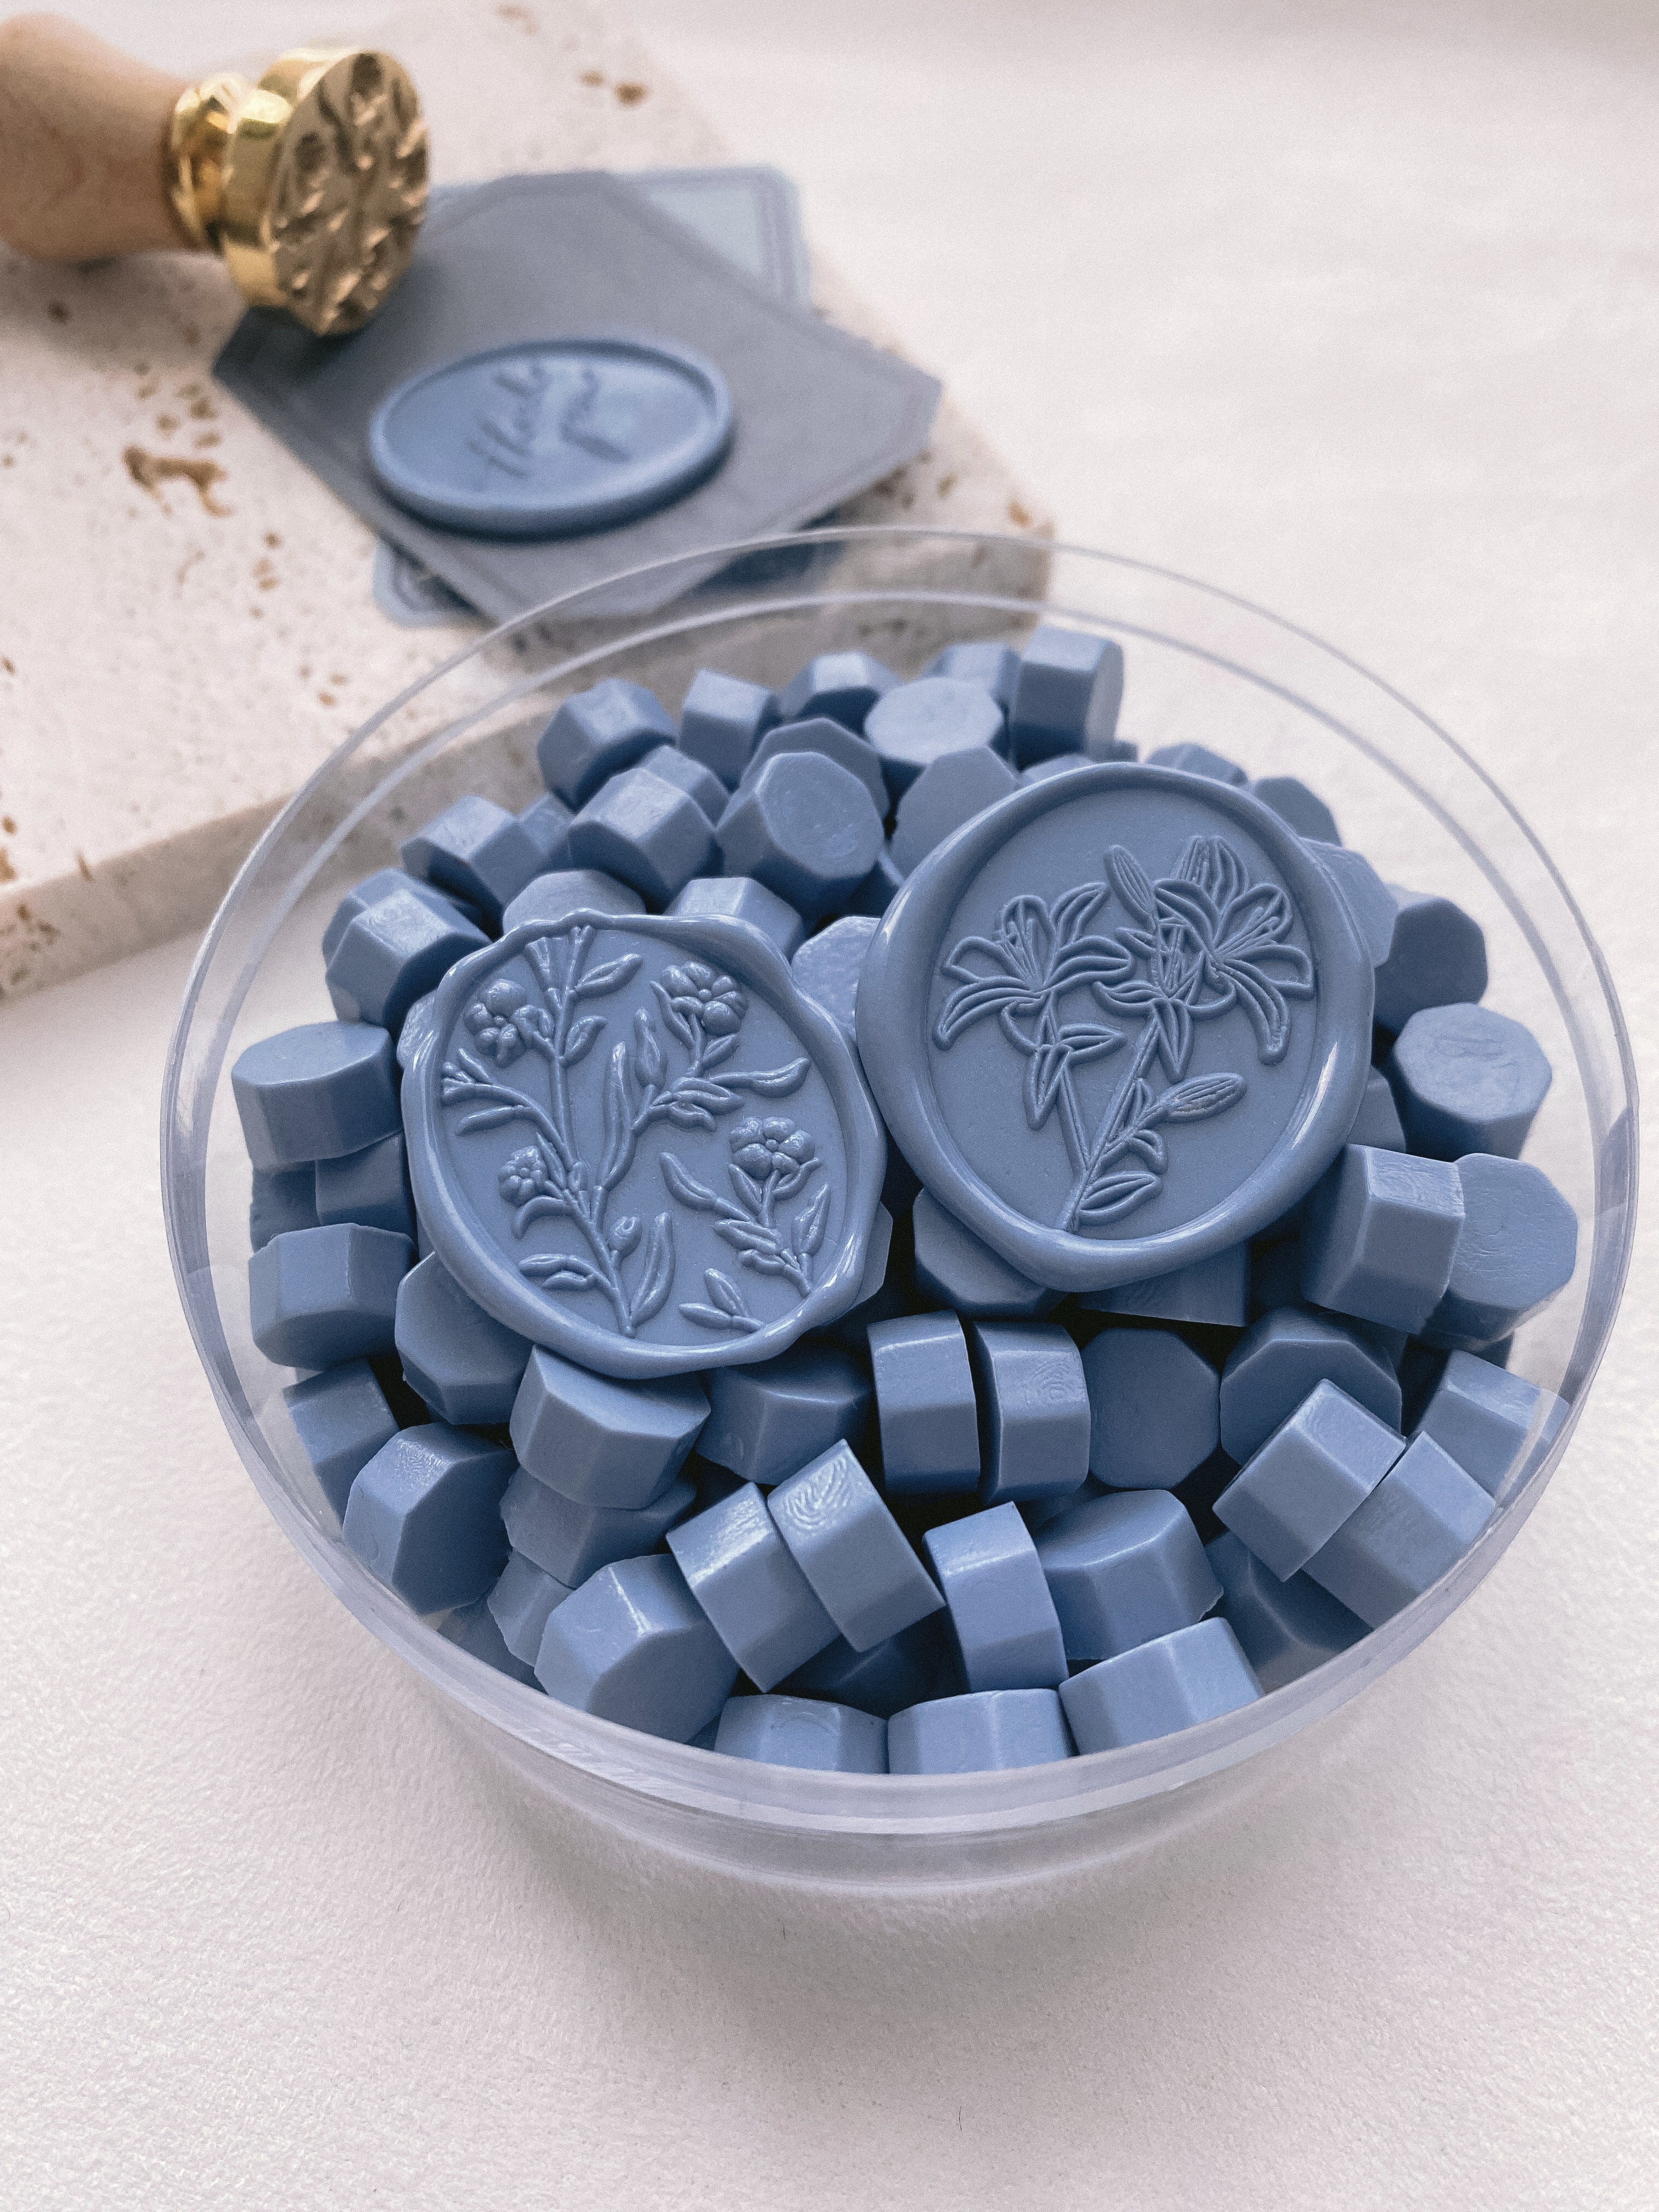  Yoption 300 Pieces Blue Mix Sealing Wax Beads, Vintage Octagon  Wax Seal Beads with 4 Candles and 2 Wax Seal Melting Spoons for Wax Seal  Stamp (Blue Mix)